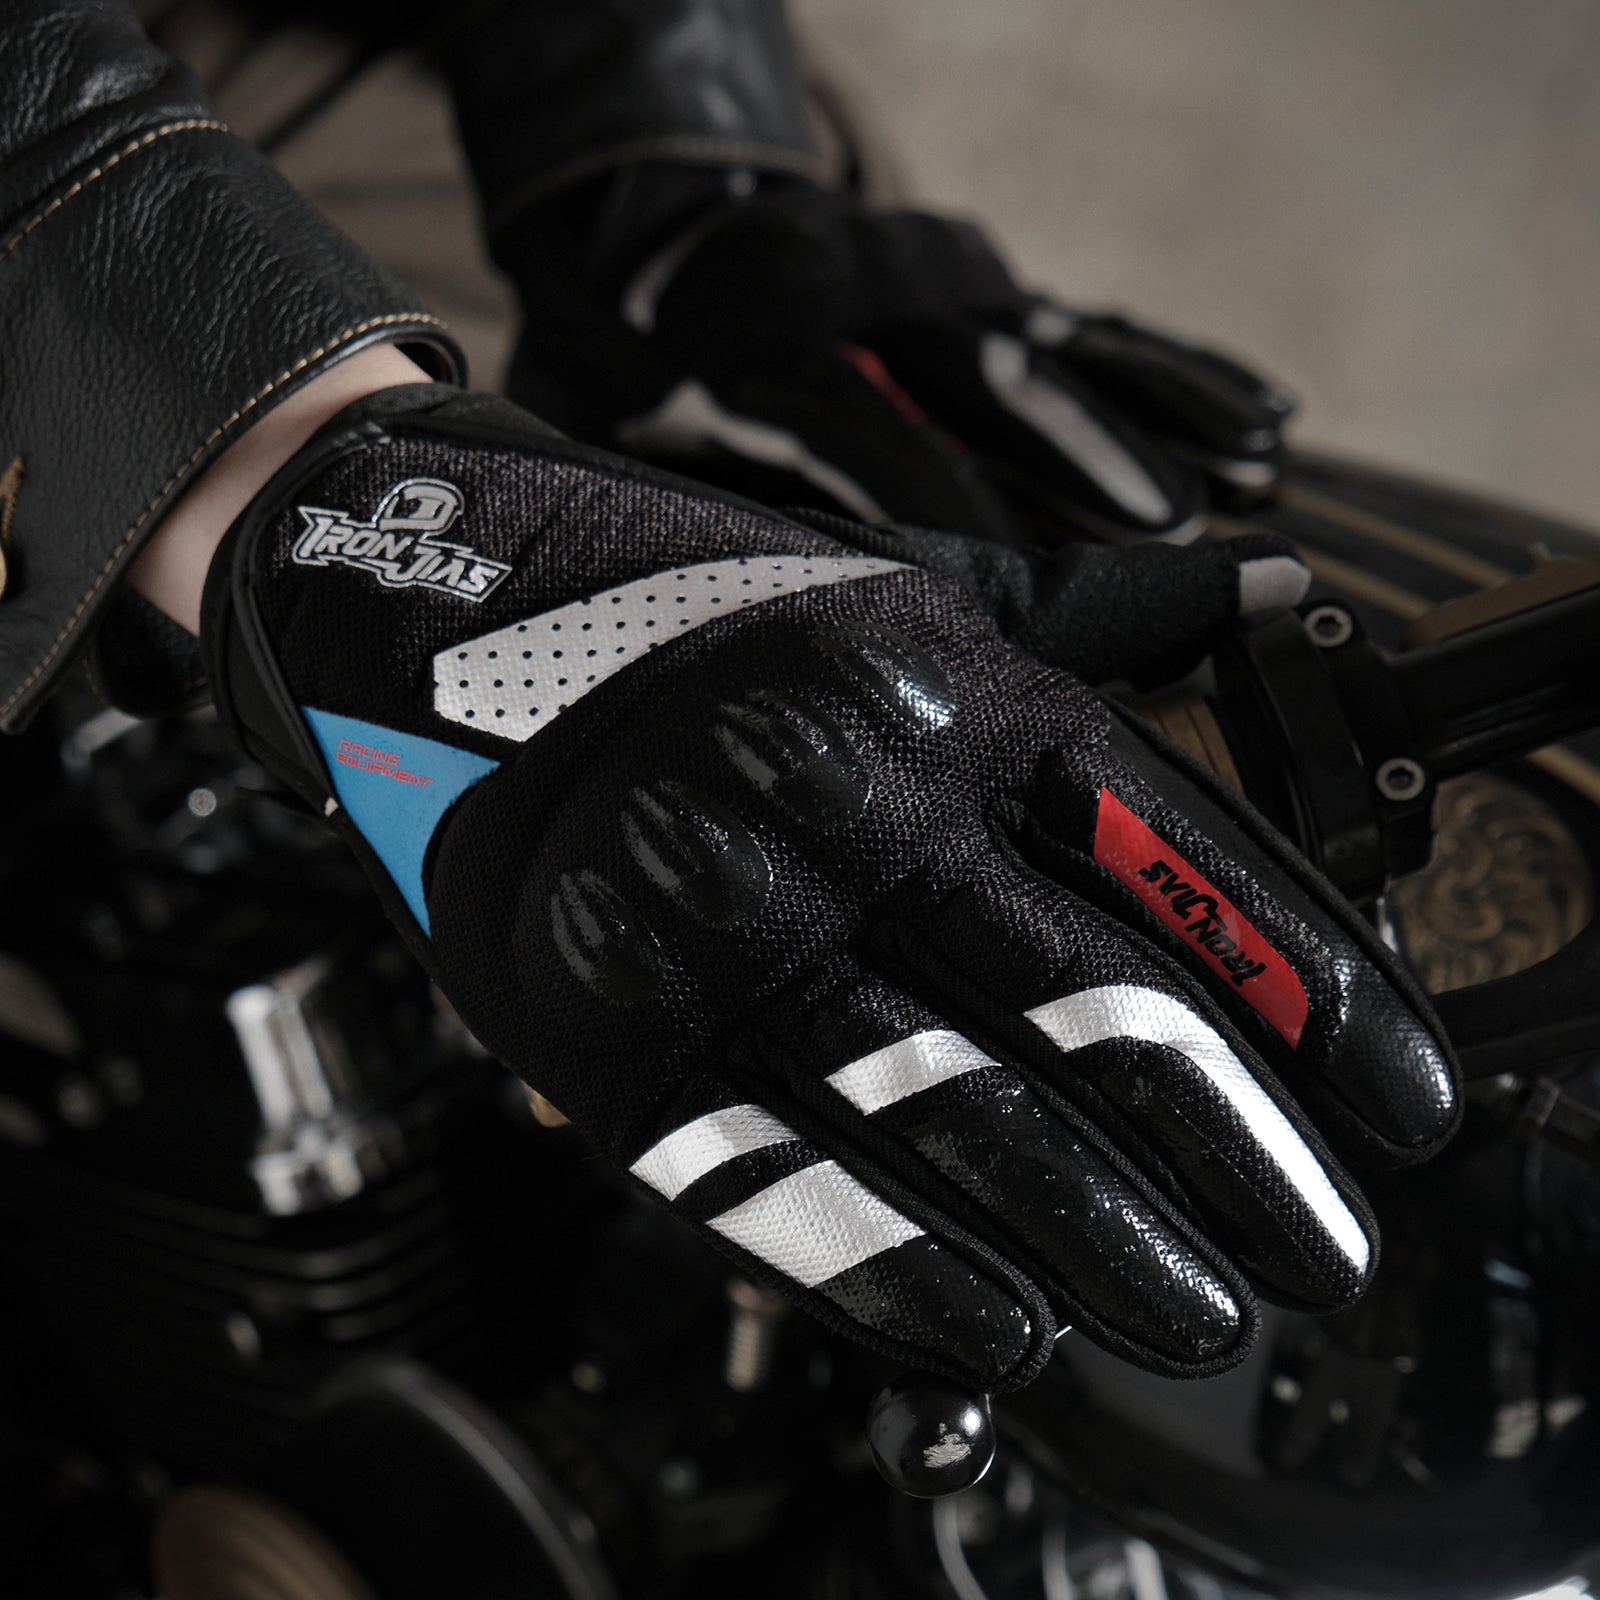 IRONJIAS Breathable Summer Motorcycle Protective Gloves